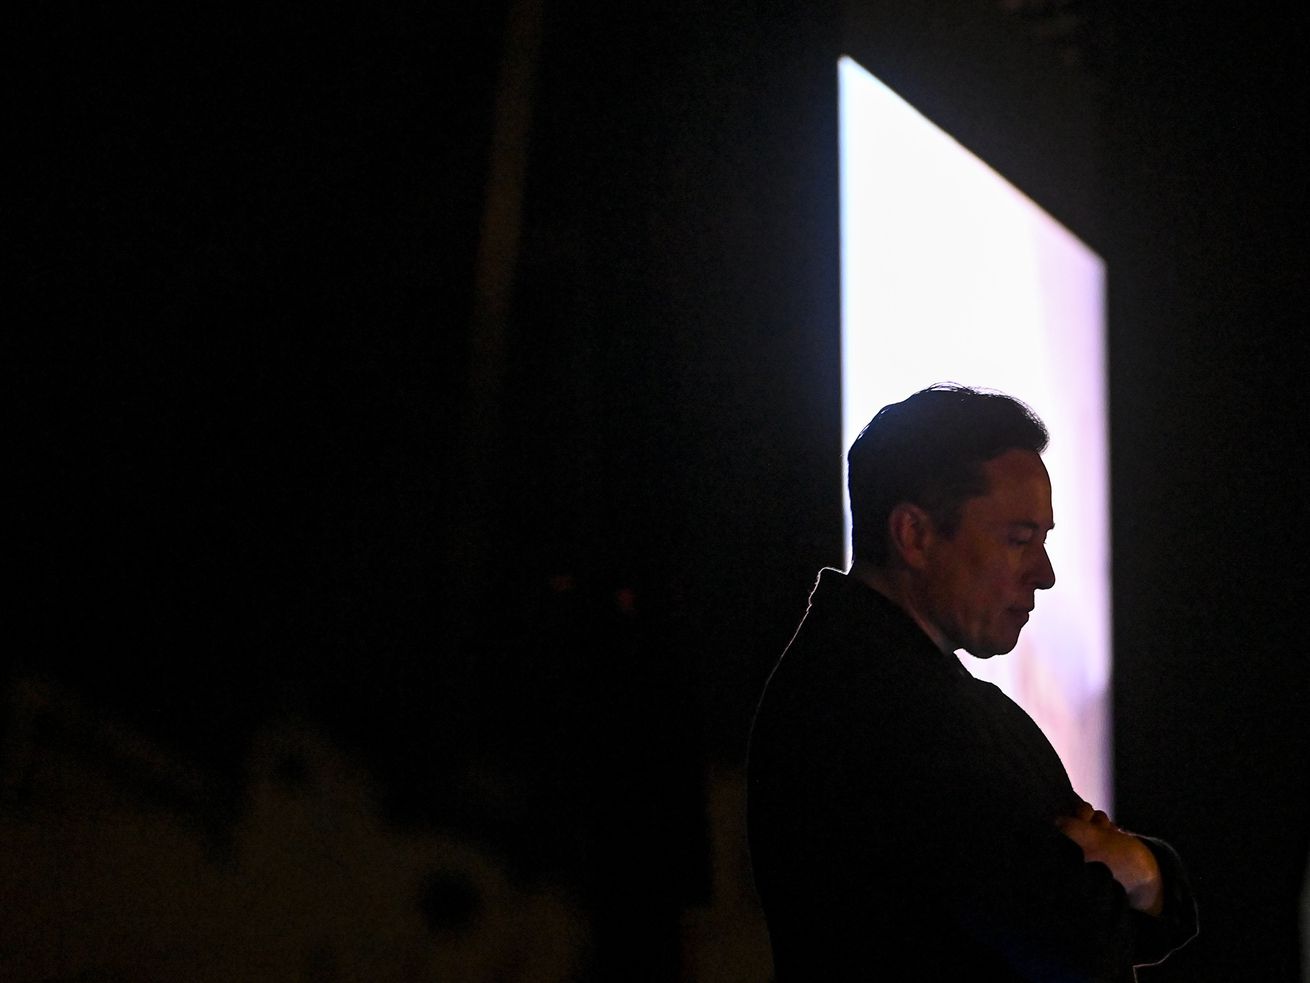 Elon Musk in profile, silhouetted in a rectangle of light.